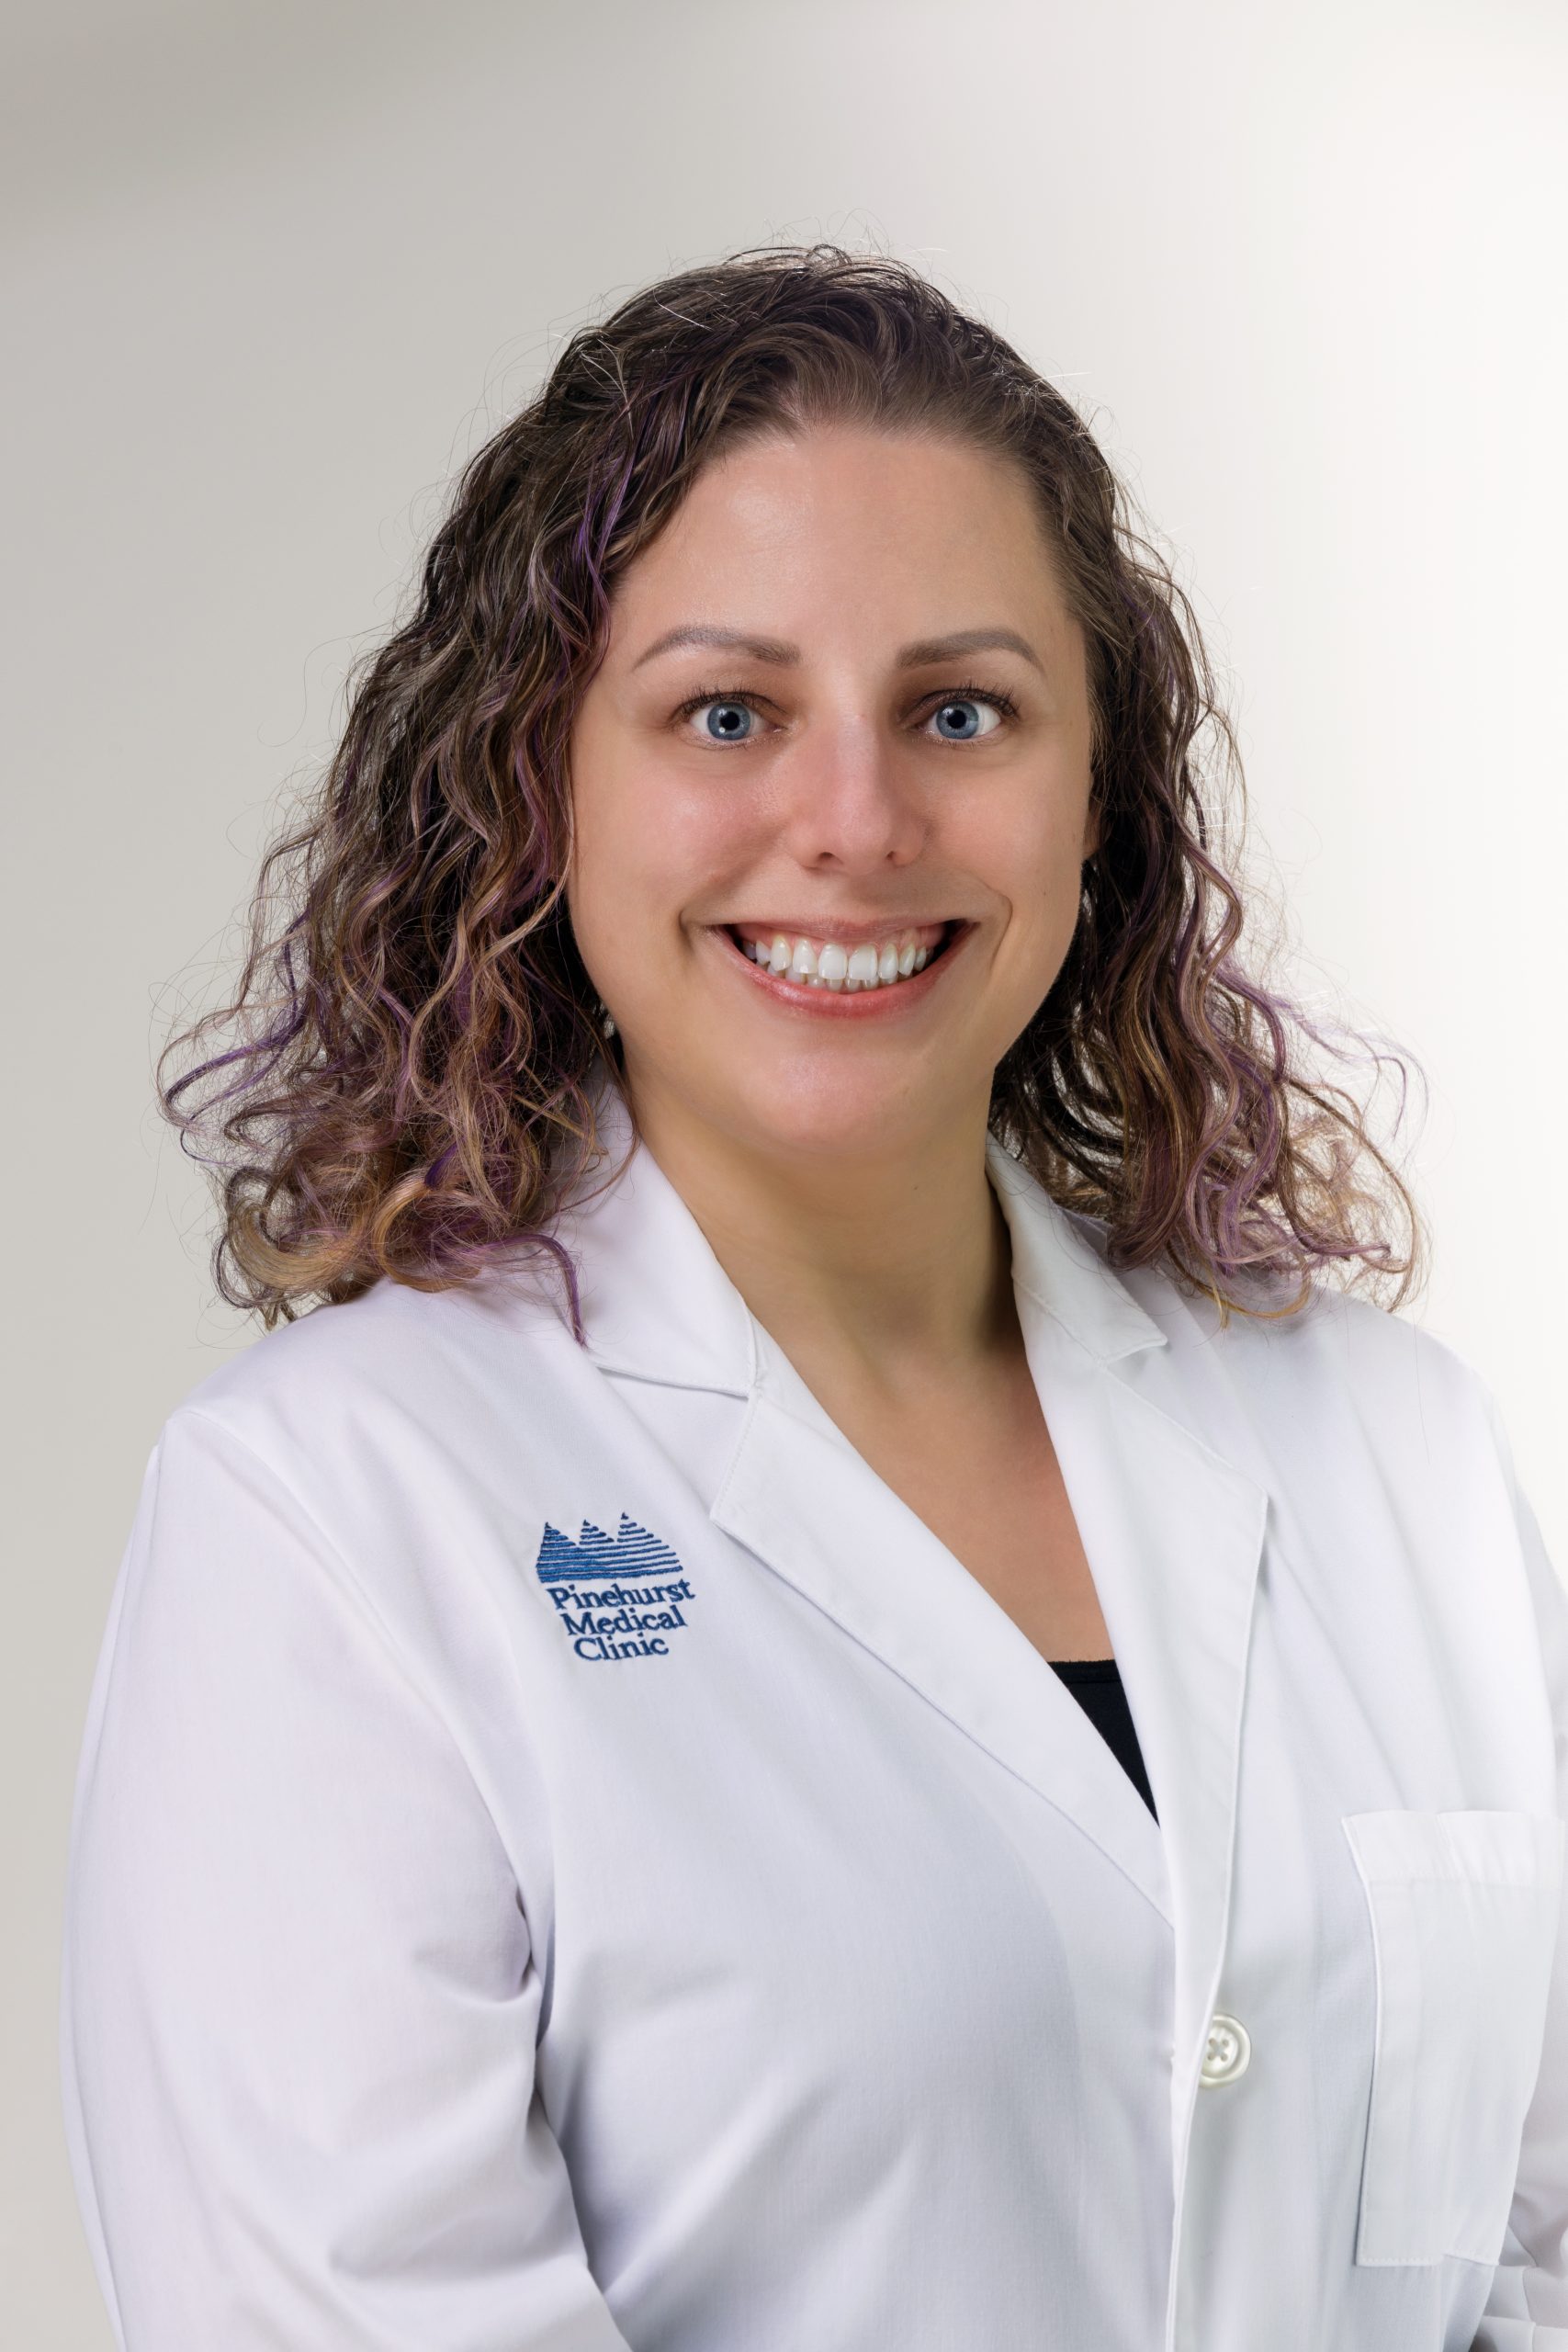 Pinehurst Medical Clinic welcomes new obesity medicine physician assistant